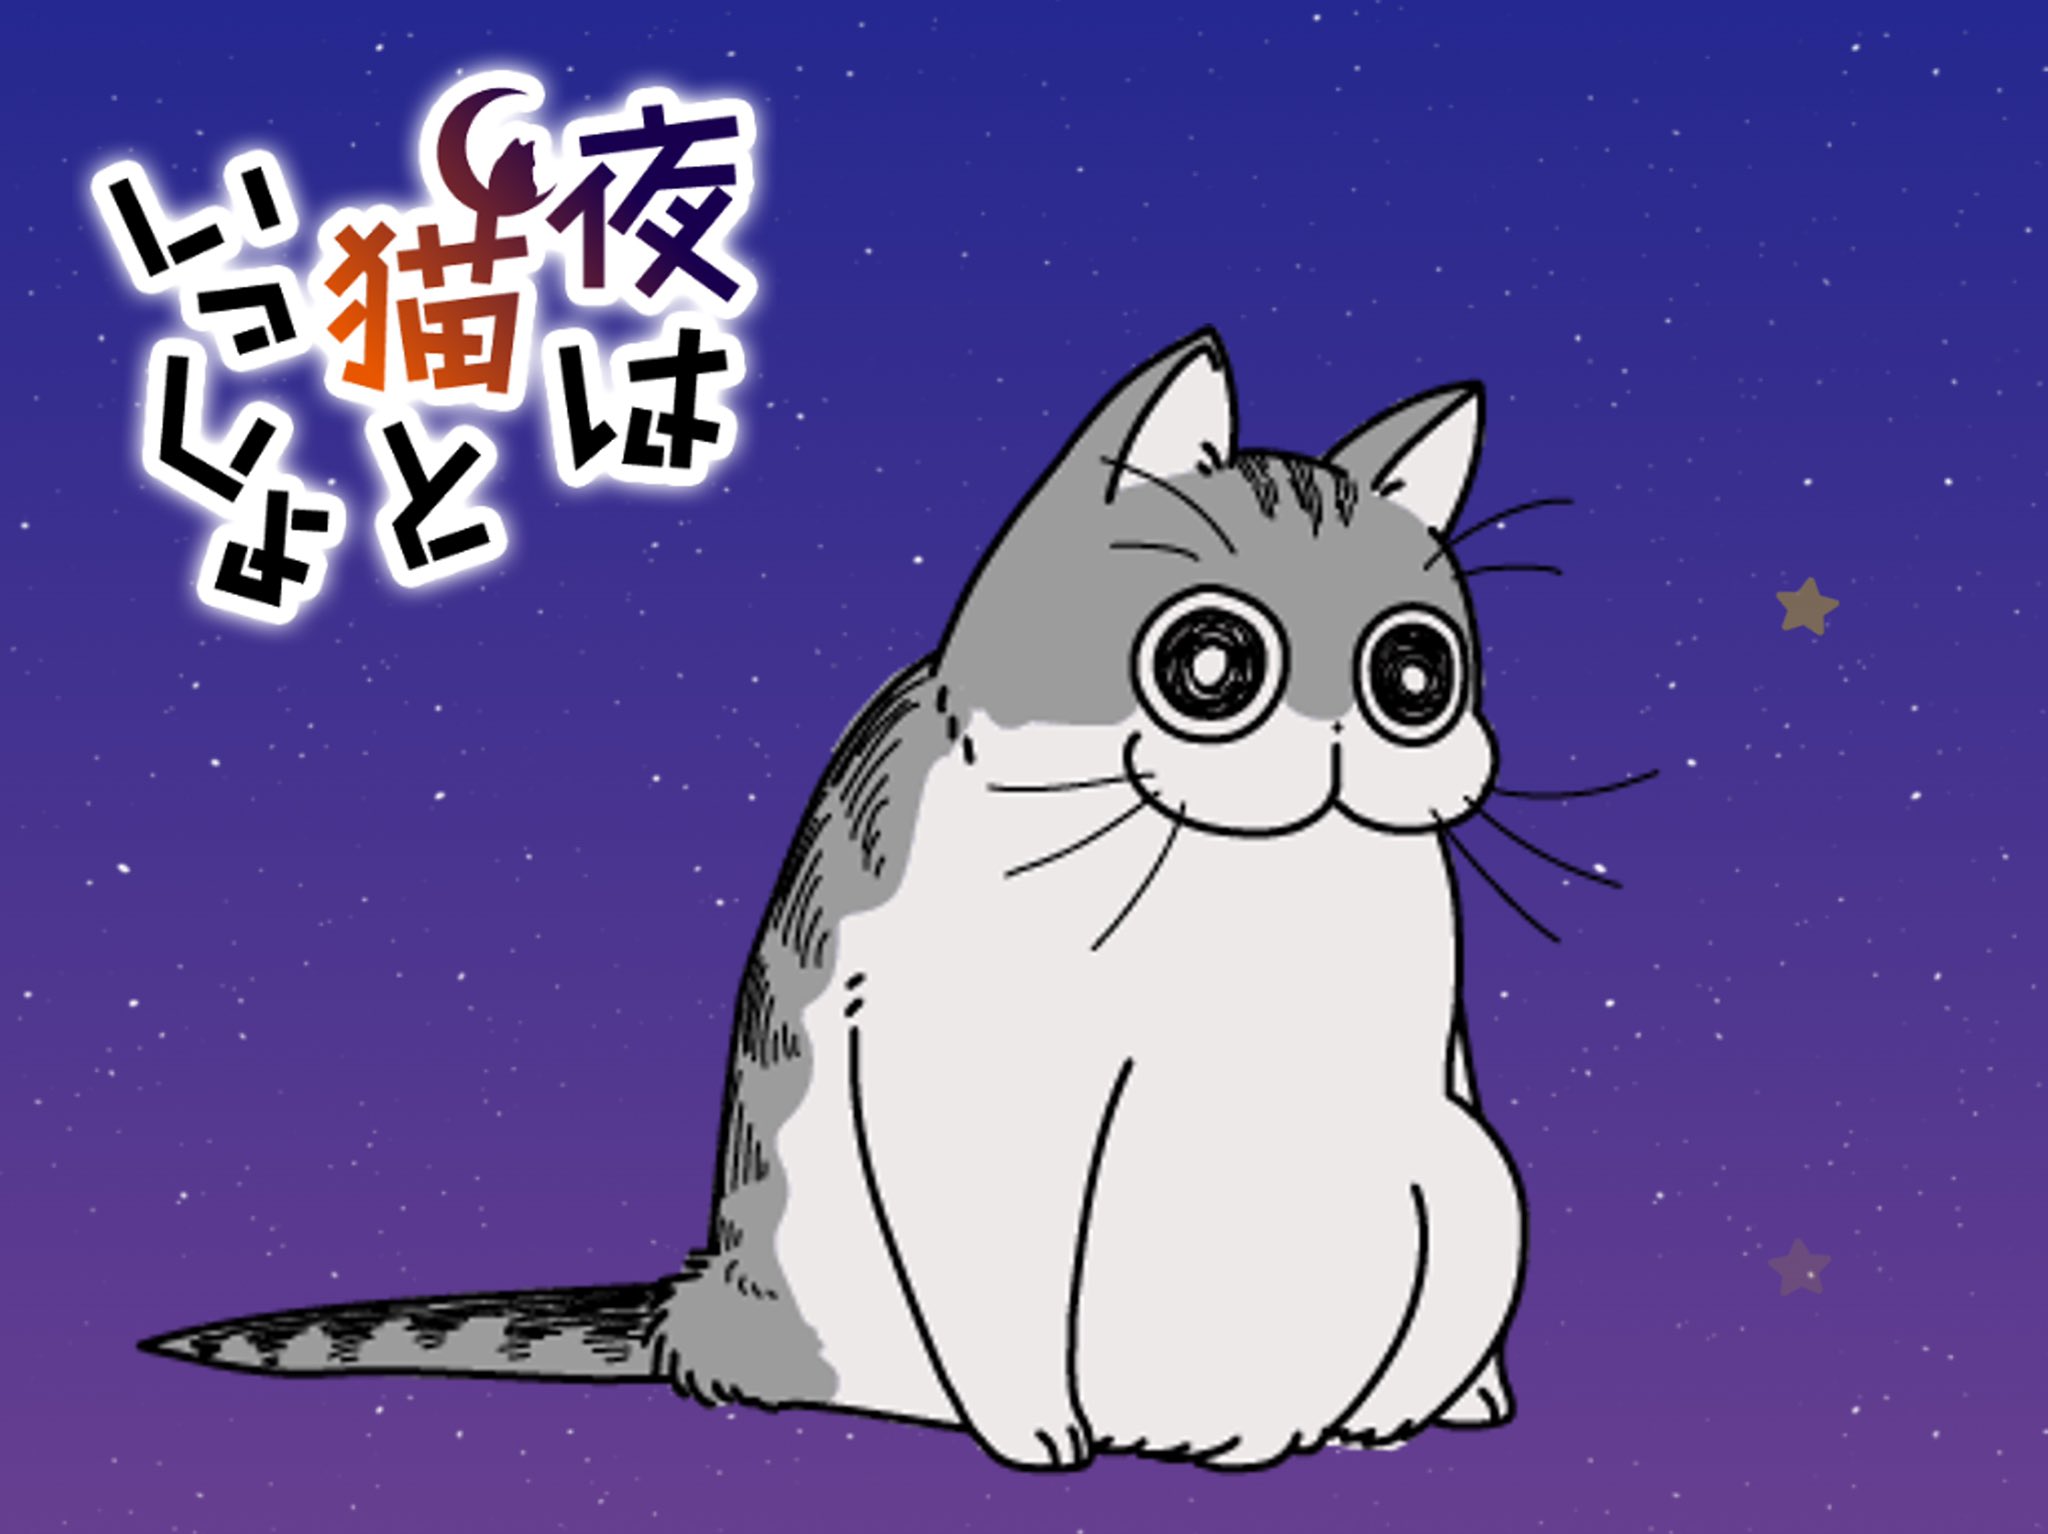 Nights With a Cat anime header